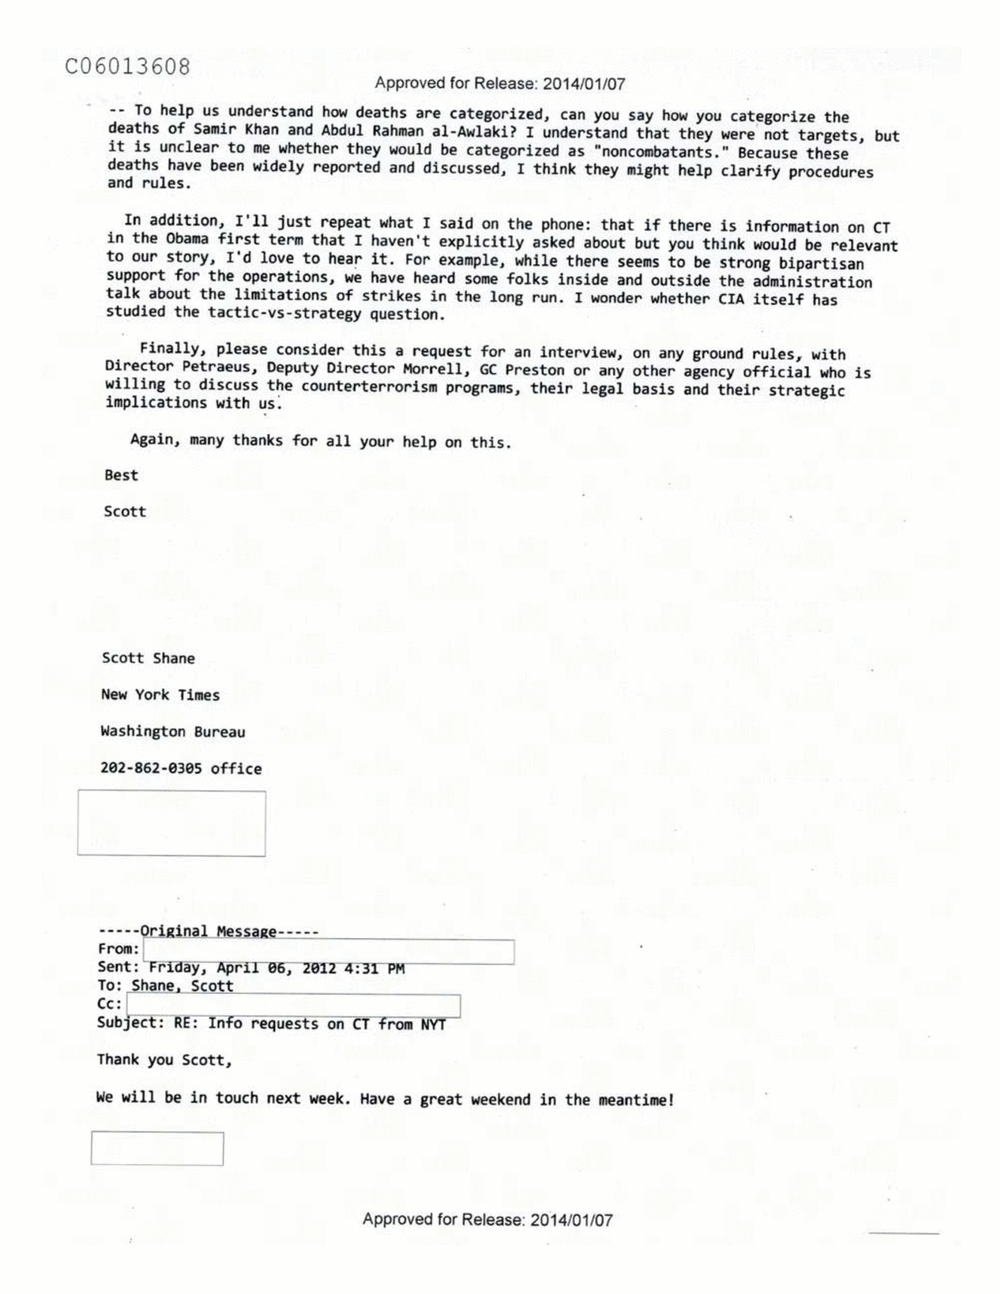 Page 420 from Email Correspondence Between Reporters and CIA Flacks